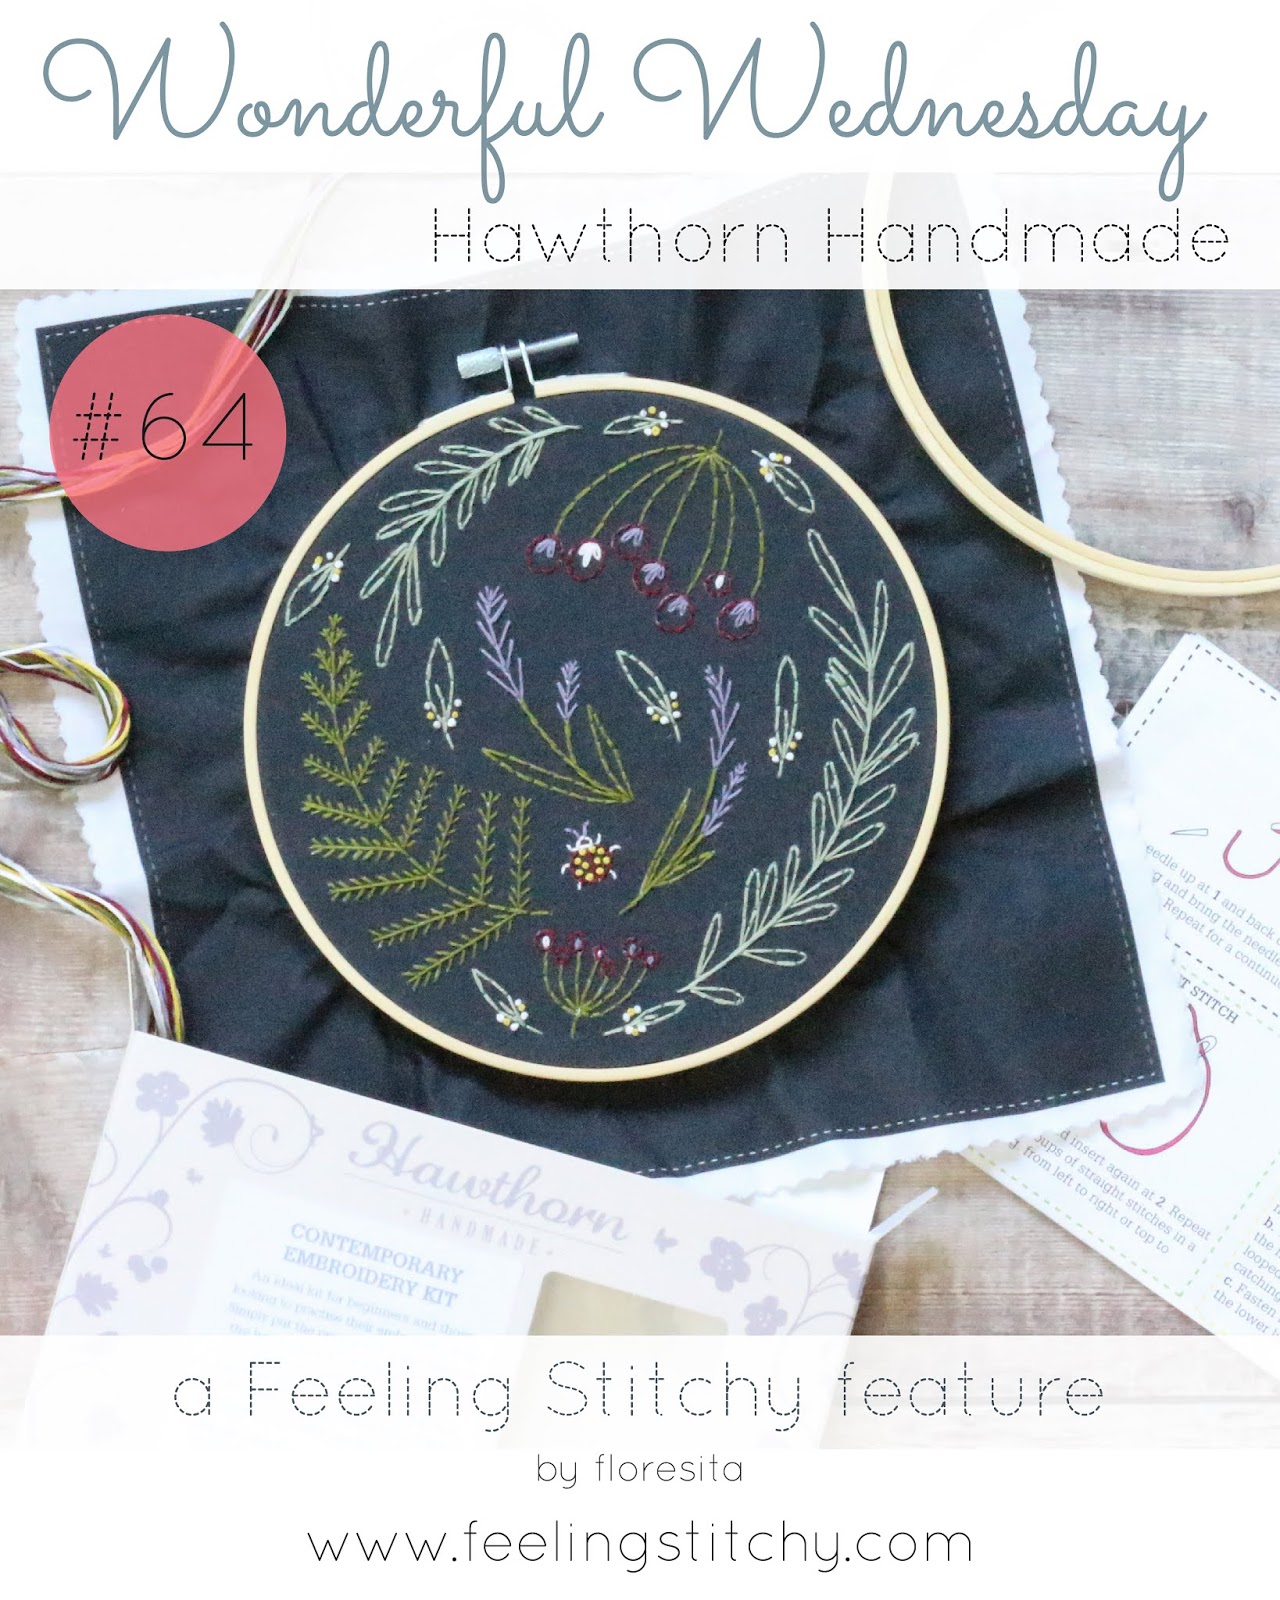 Wonderful Wednesday 64 Hawthorn Handmade a feature by floresita for Feeling Stitchy